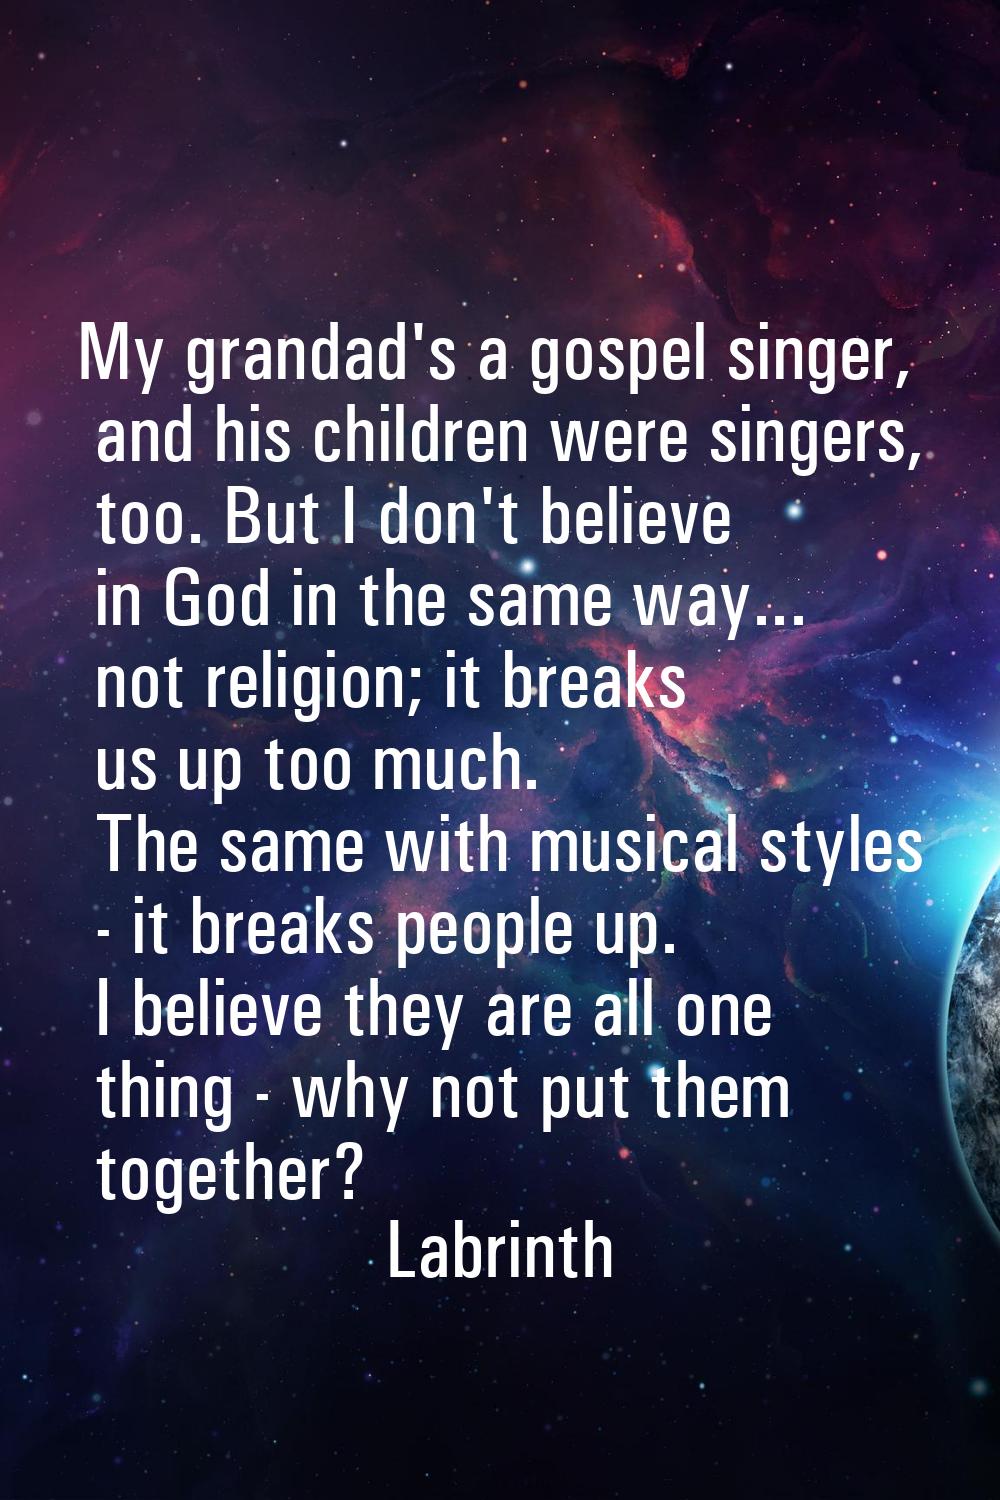 My grandad's a gospel singer, and his children were singers, too. But I don't believe in God in the